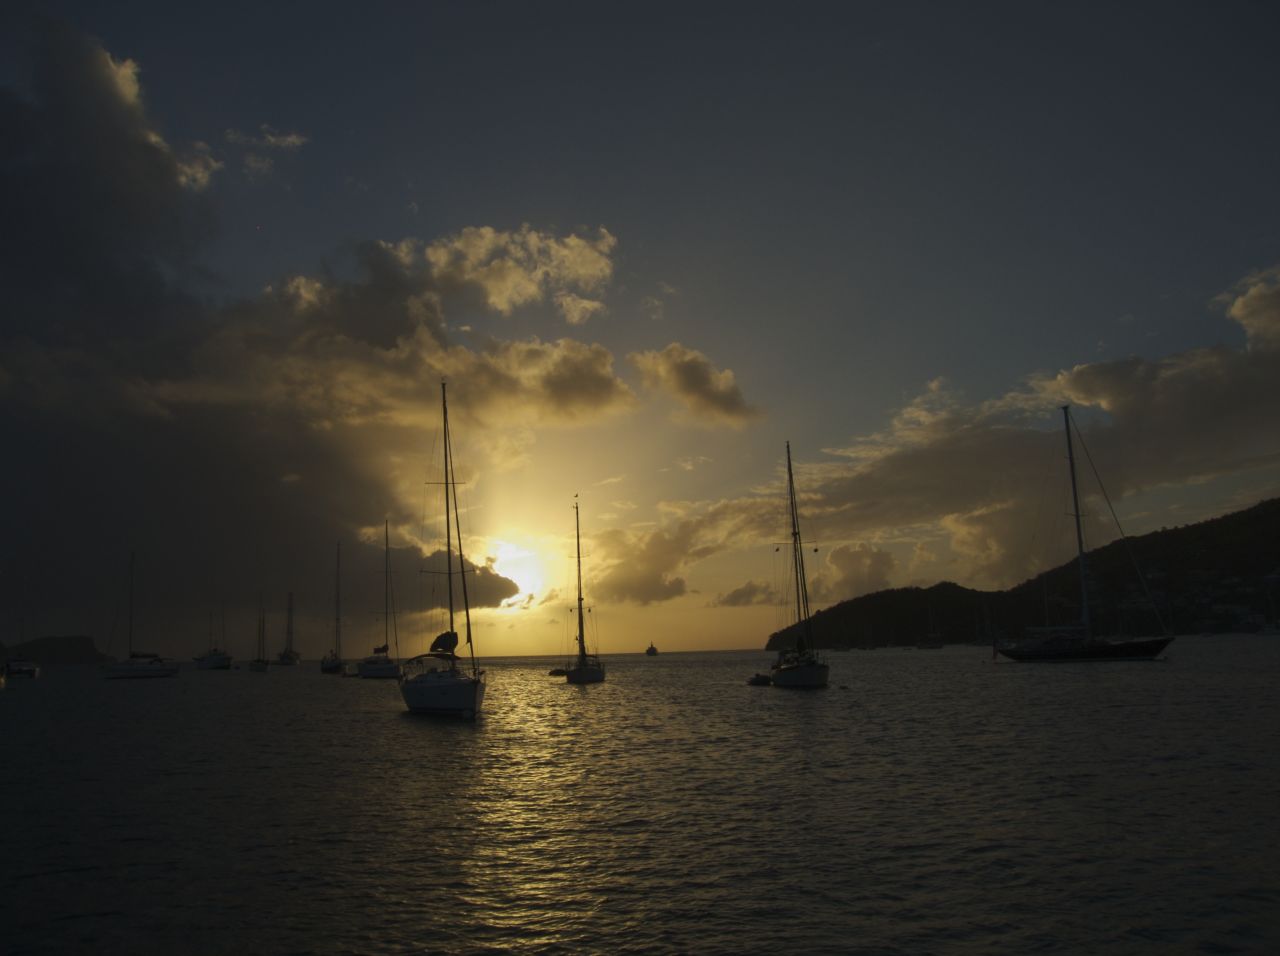 <strong>15. Bequia</strong>: In the Caribbean's St Vincent and the Grenadines lies Bequia, a welcoming island with palm tree-lined beaches and spectacular sunsets. <em>Photo courtesy Chris LeCroy/Creative Commons/Flickr</em>